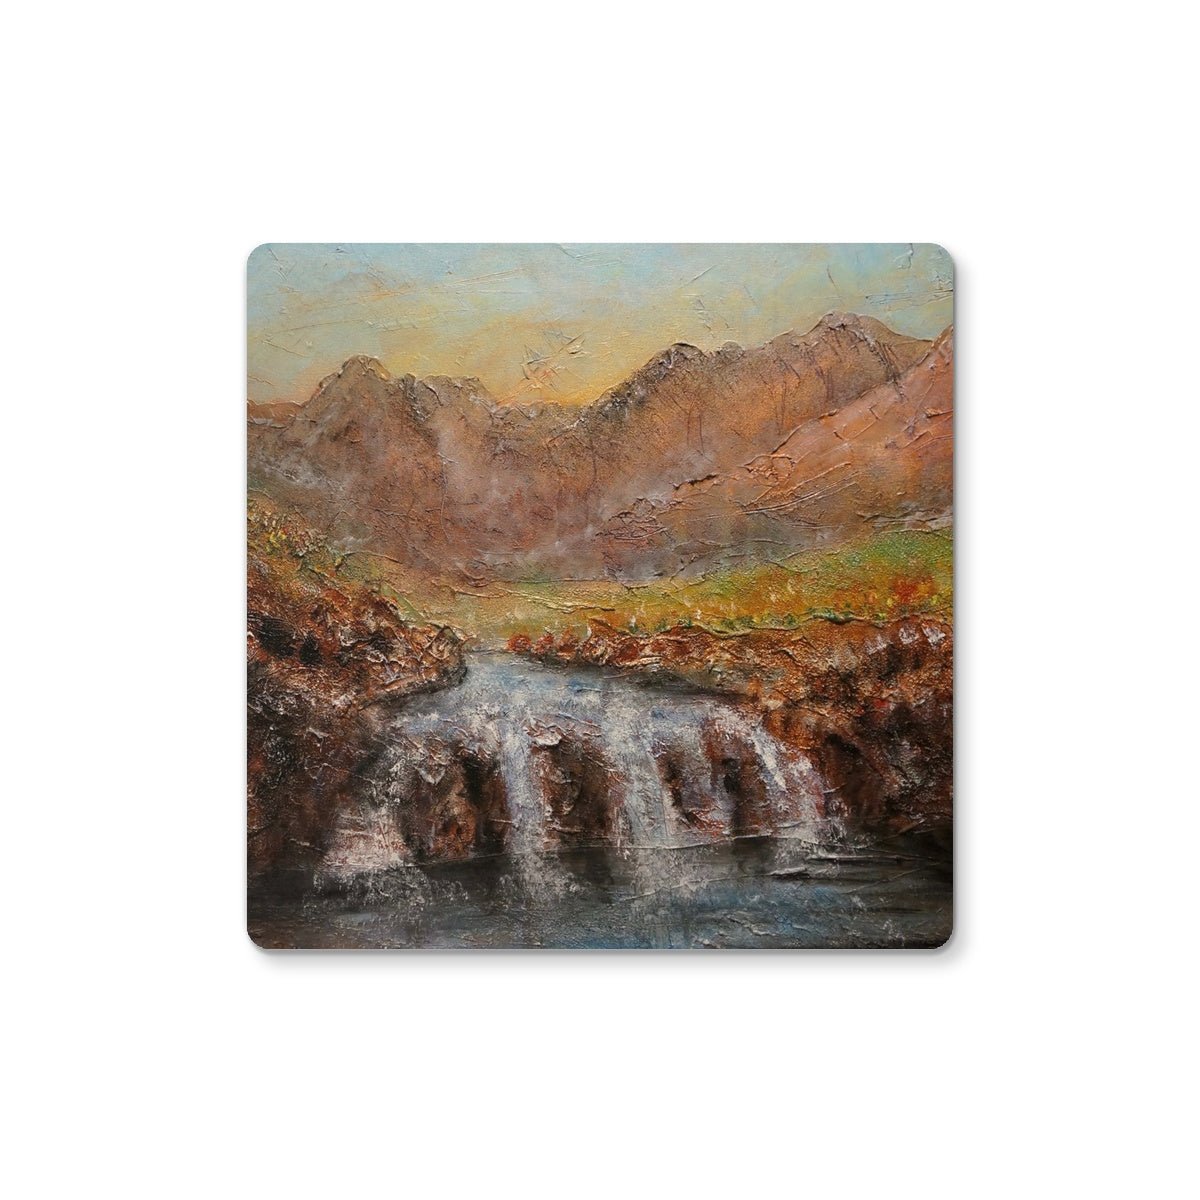 Fairy Pools Dawn Skye Art Gifts Coaster-Coasters-Skye Art Gallery-4 Coasters-Paintings, Prints, Homeware, Art Gifts From Scotland By Scottish Artist Kevin Hunter